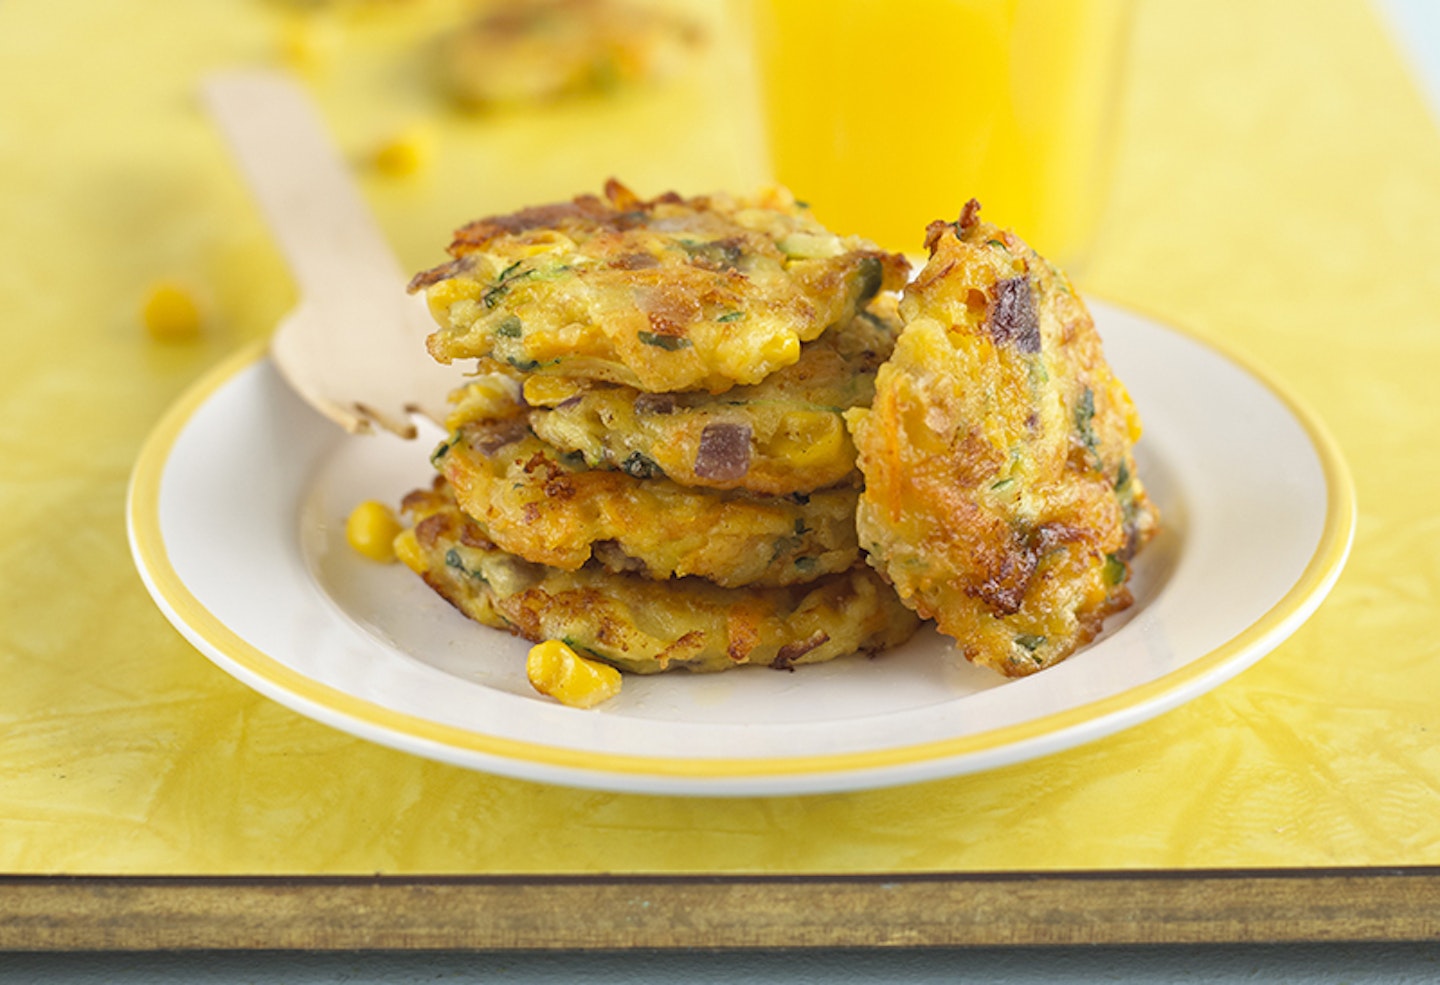 Carrot and sweetcorn fritters